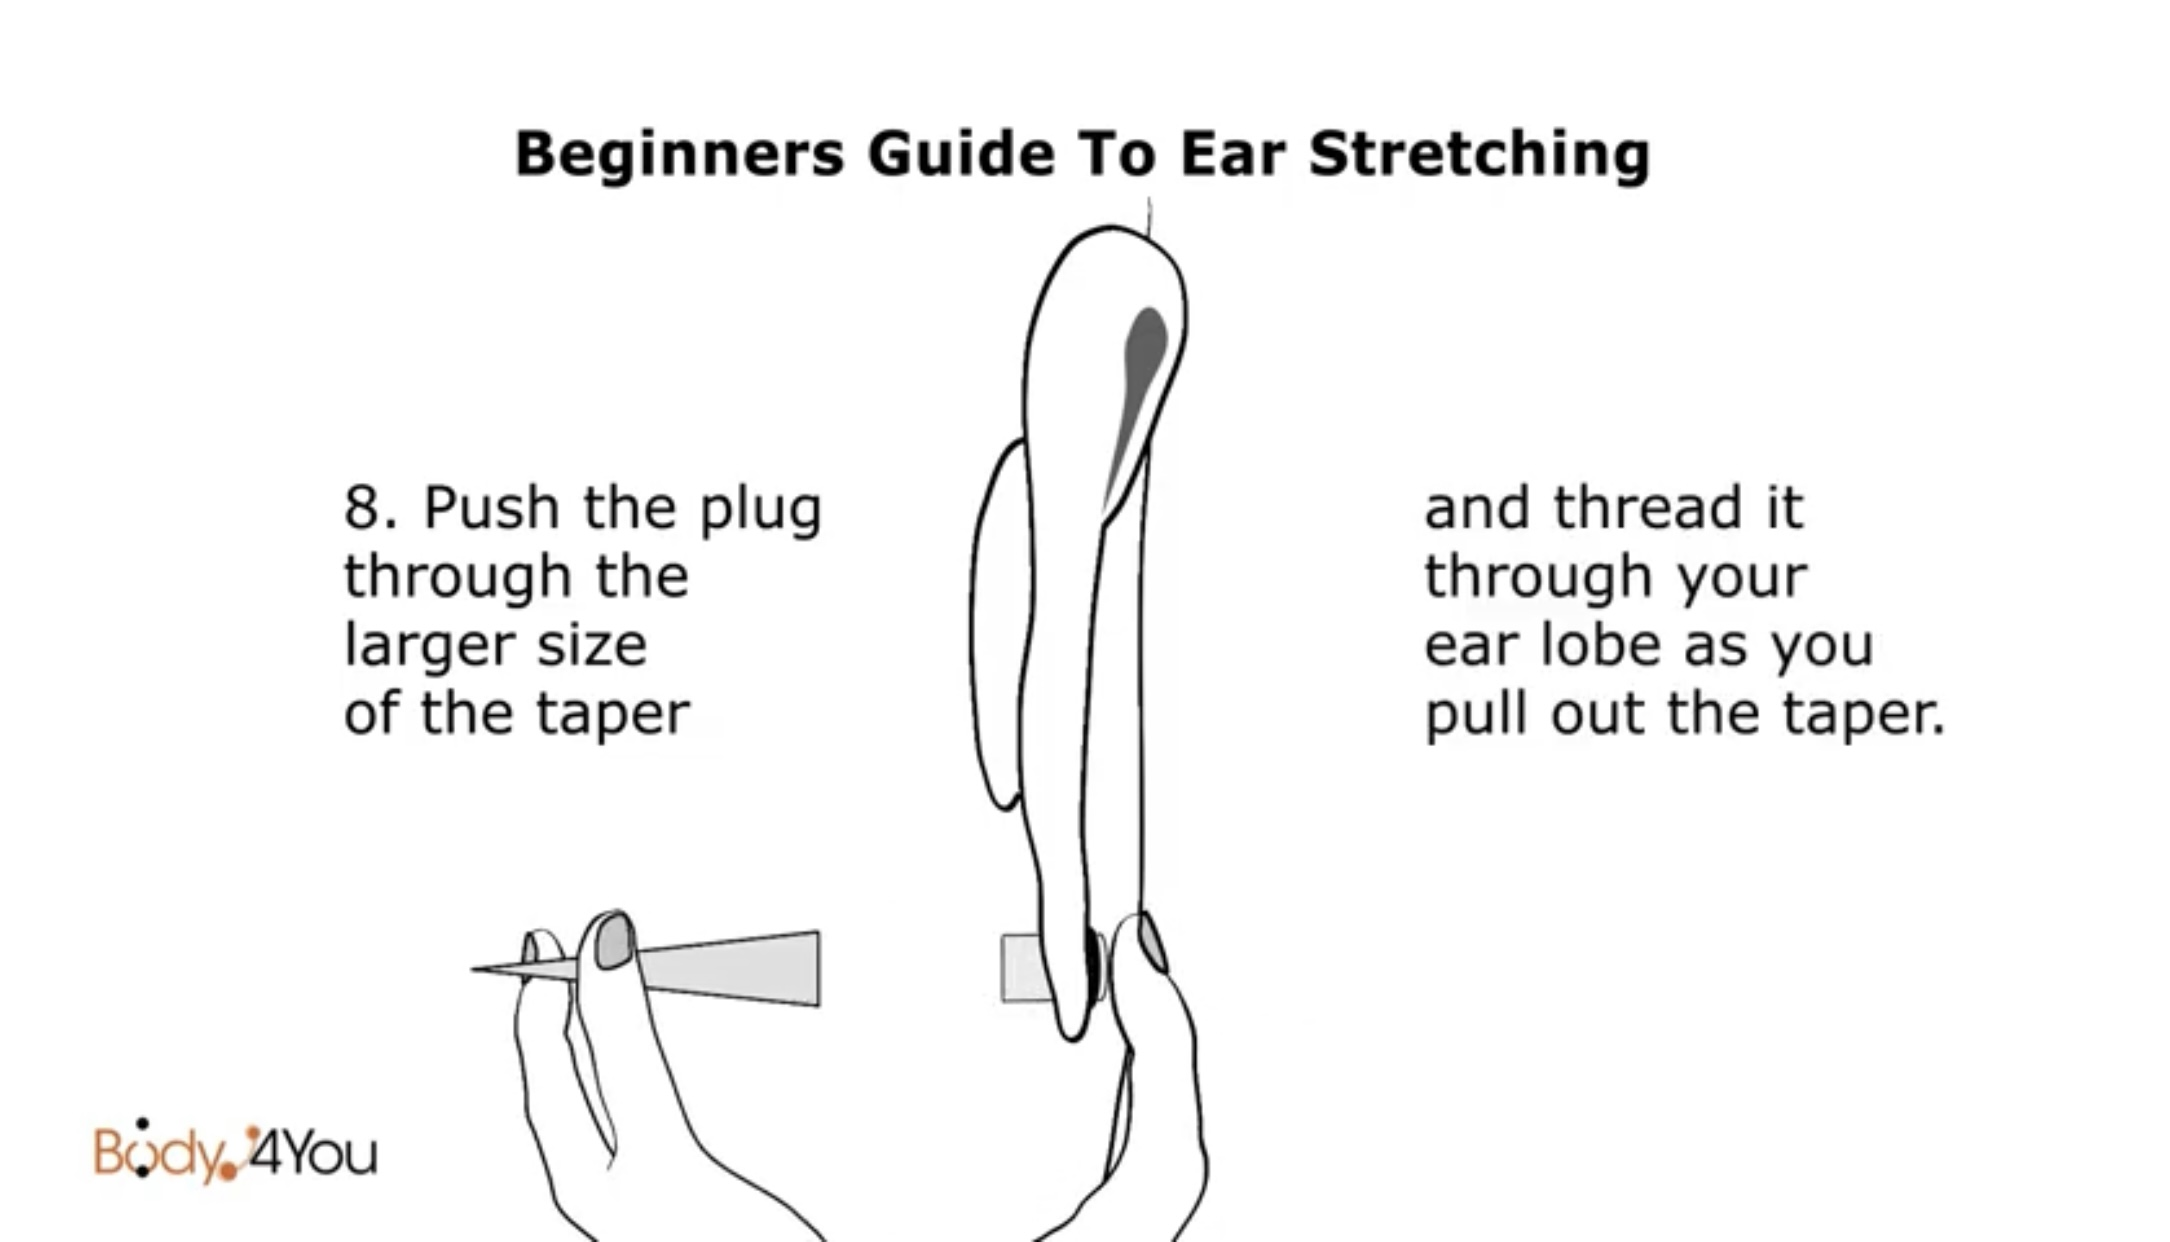 Stretching Ears with Tape: A Guide